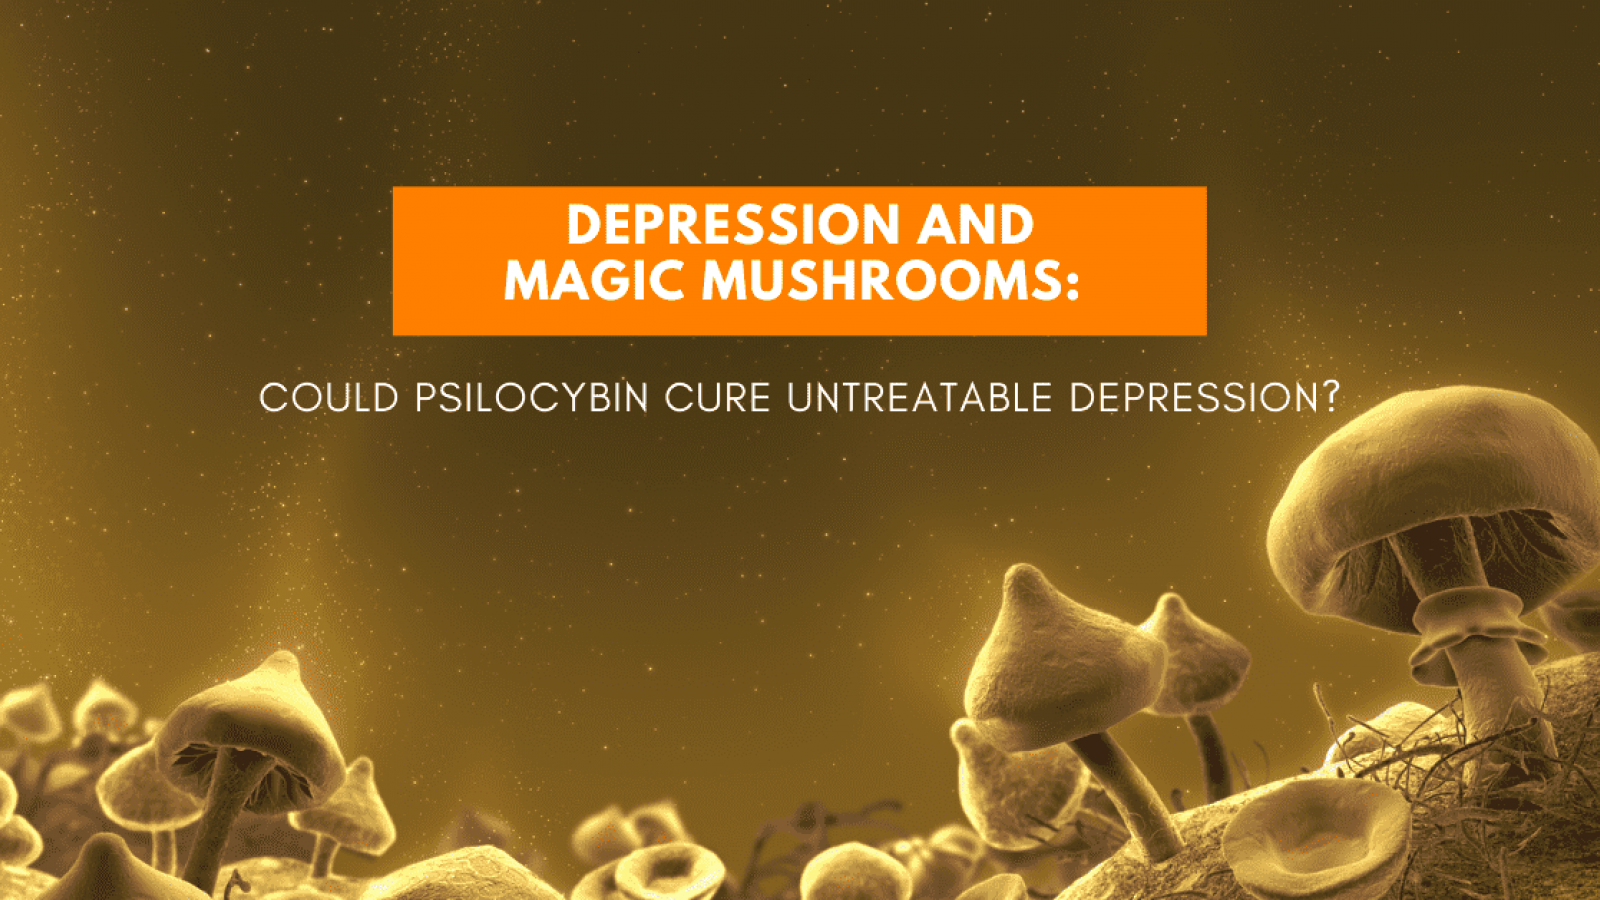 Depression and magic mushrooms: could synthetic psilocybin cure untreatable depression?